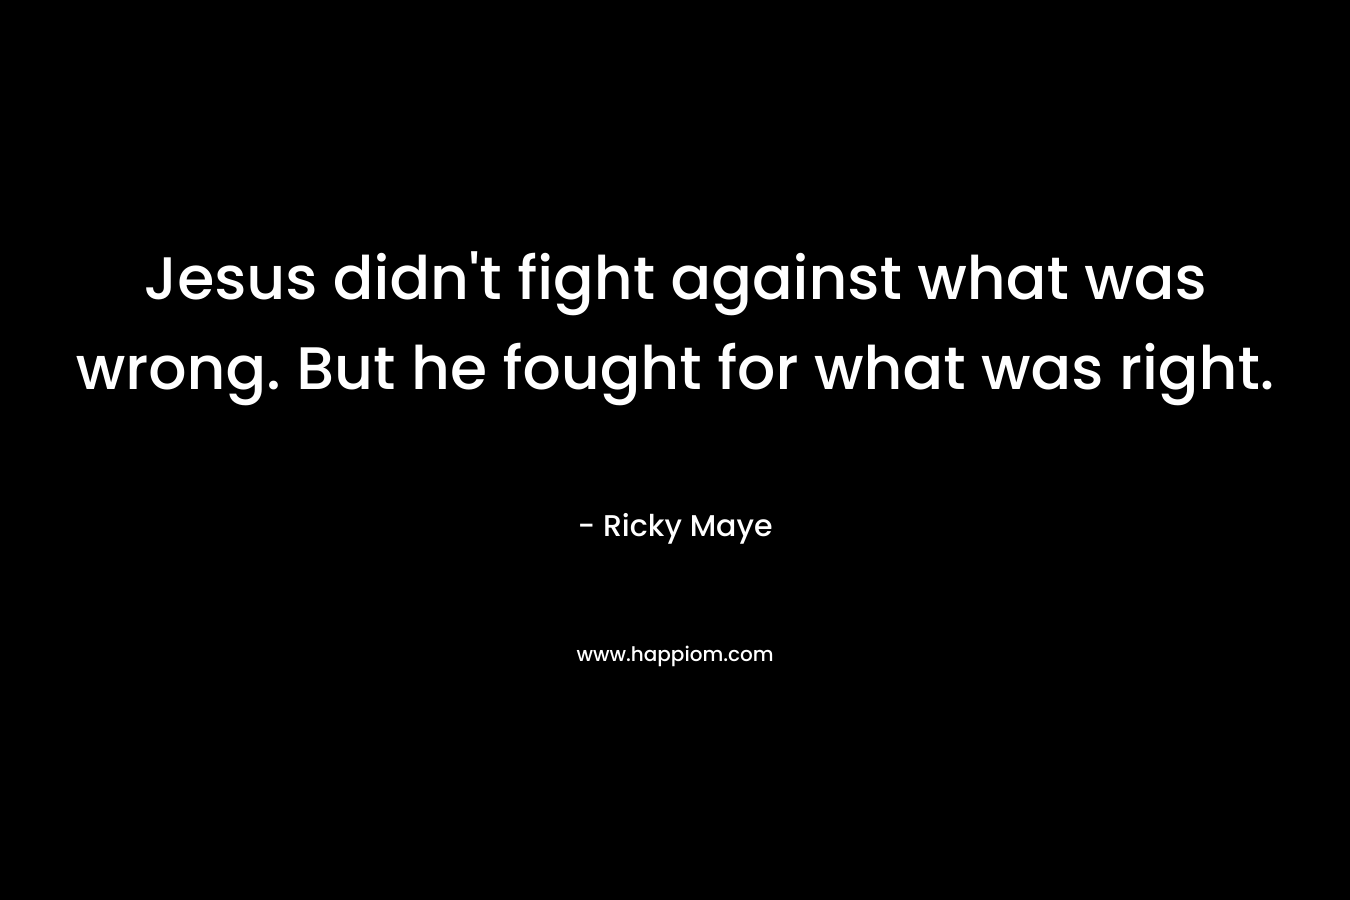 Jesus didn't fight against what was wrong. But he fought for what was right.